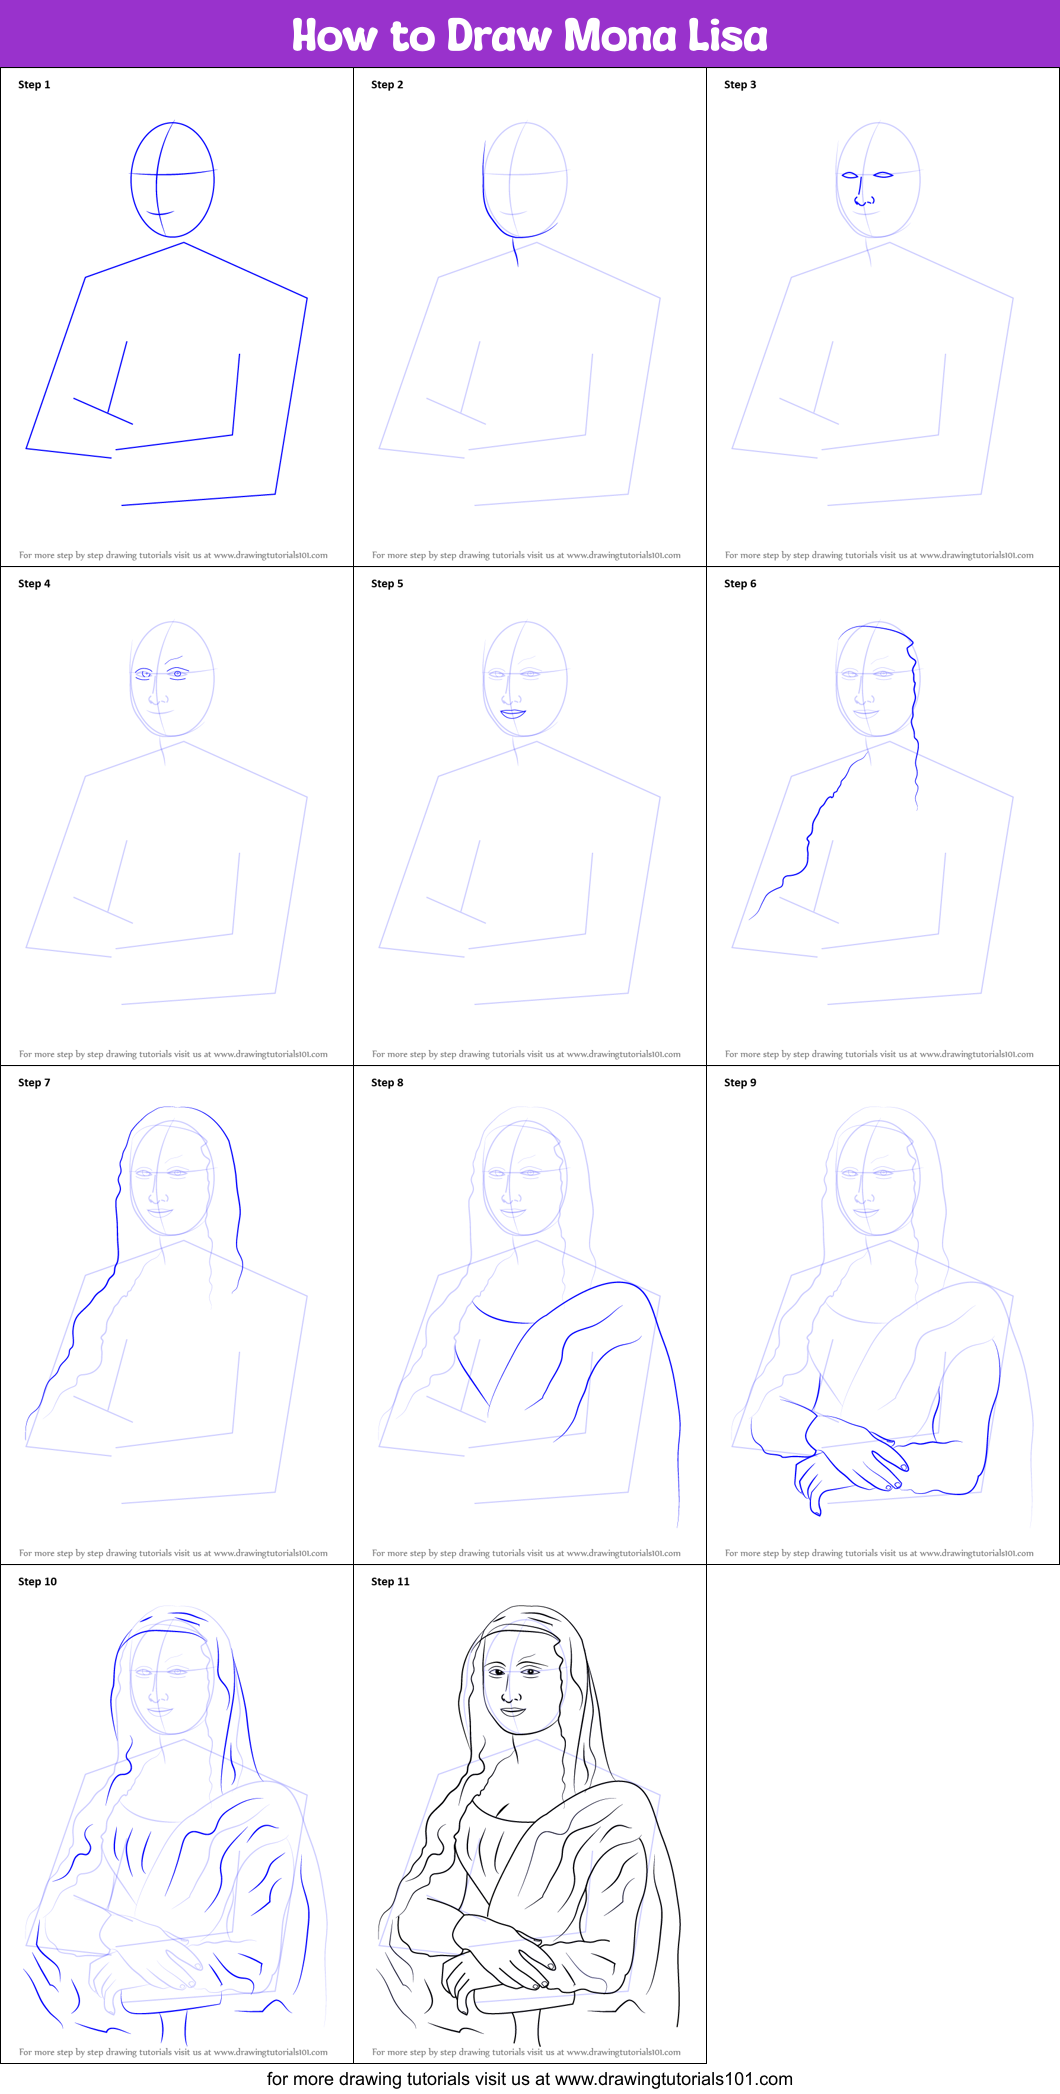 How to Draw Mona Lisa printable step by step drawing sheet